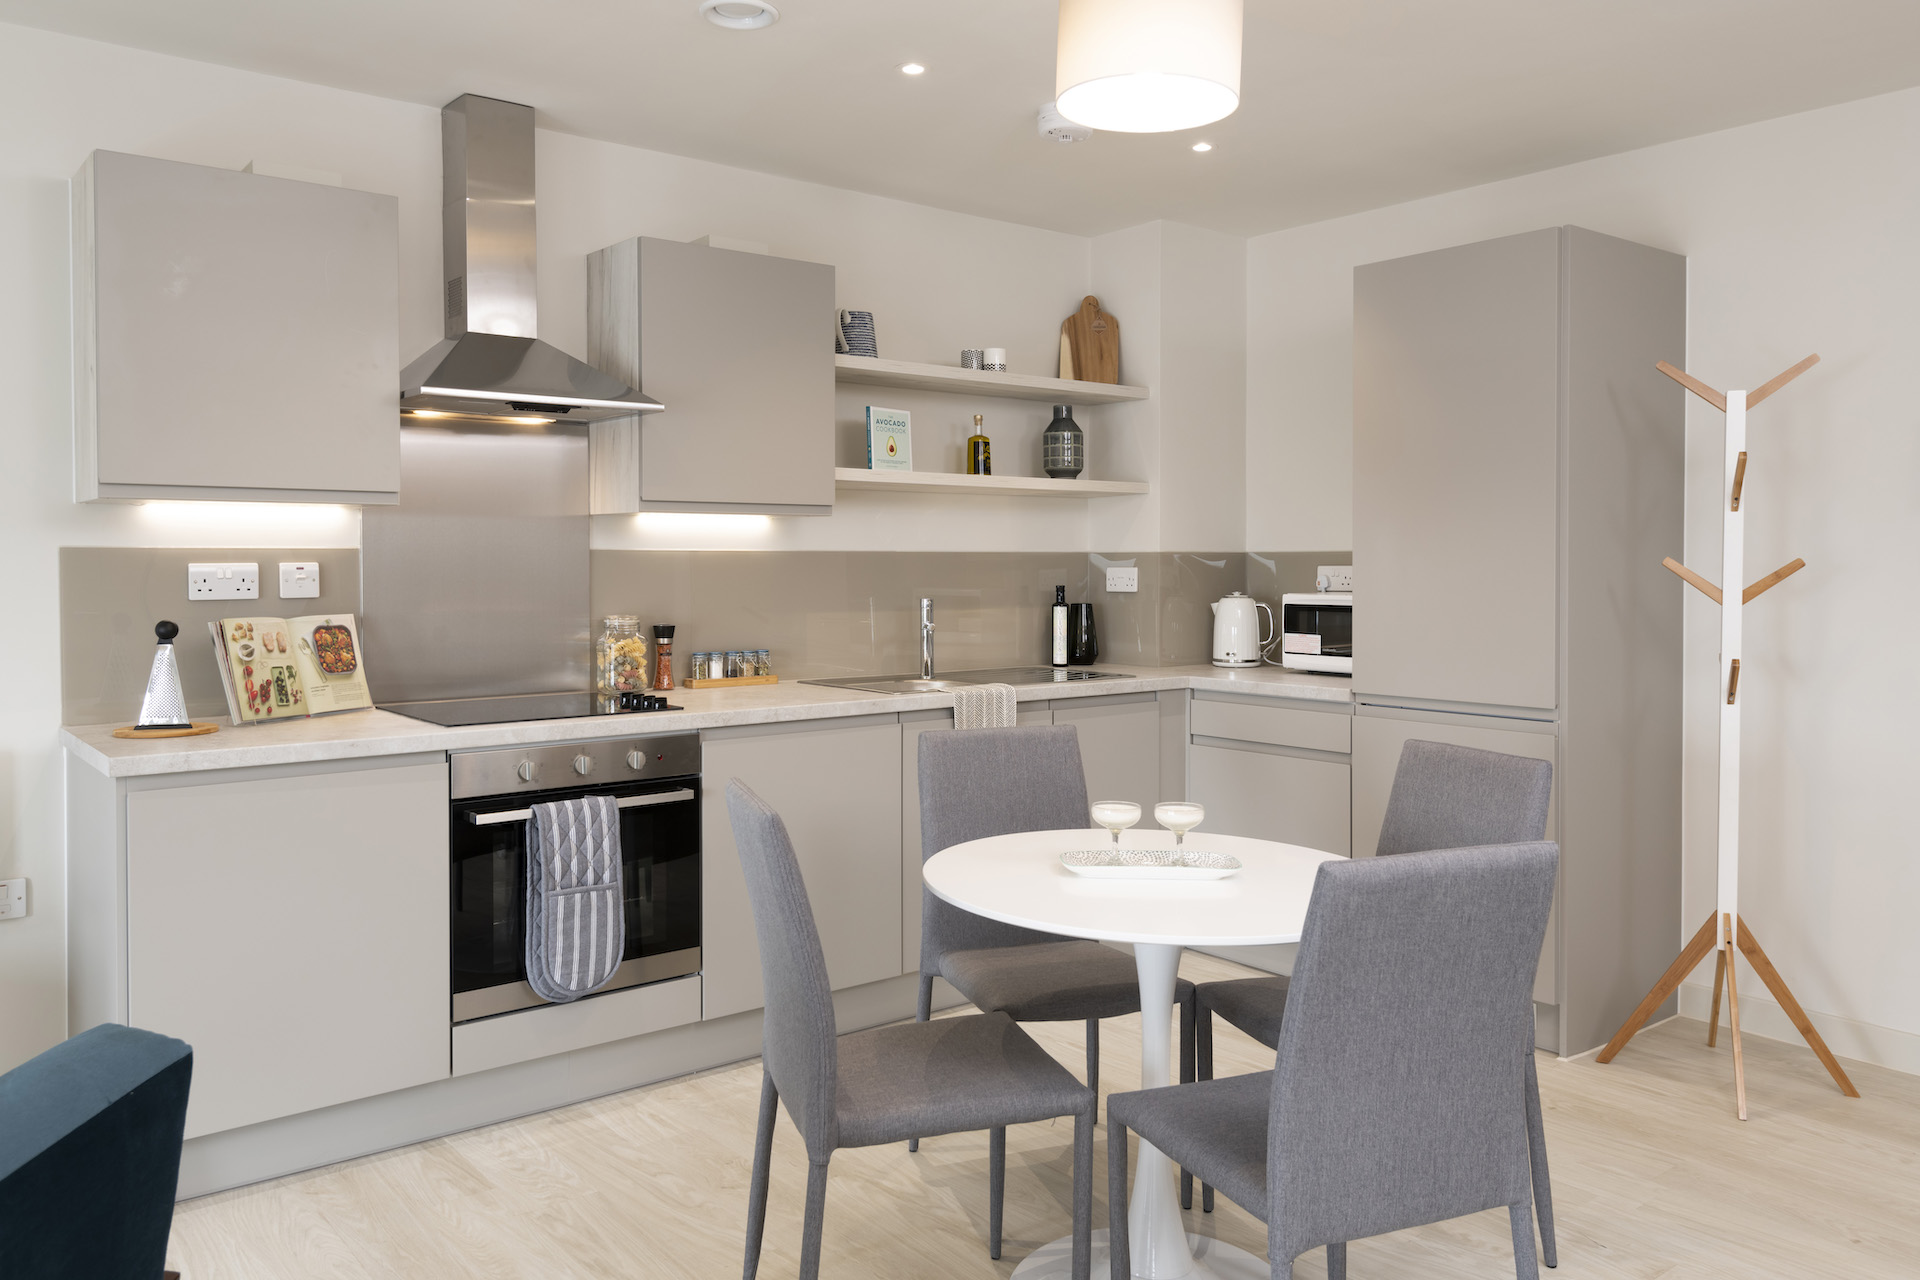 Apartments to Rent by Allsop at The Trilogy, Manchester, M15, kitchen dining area